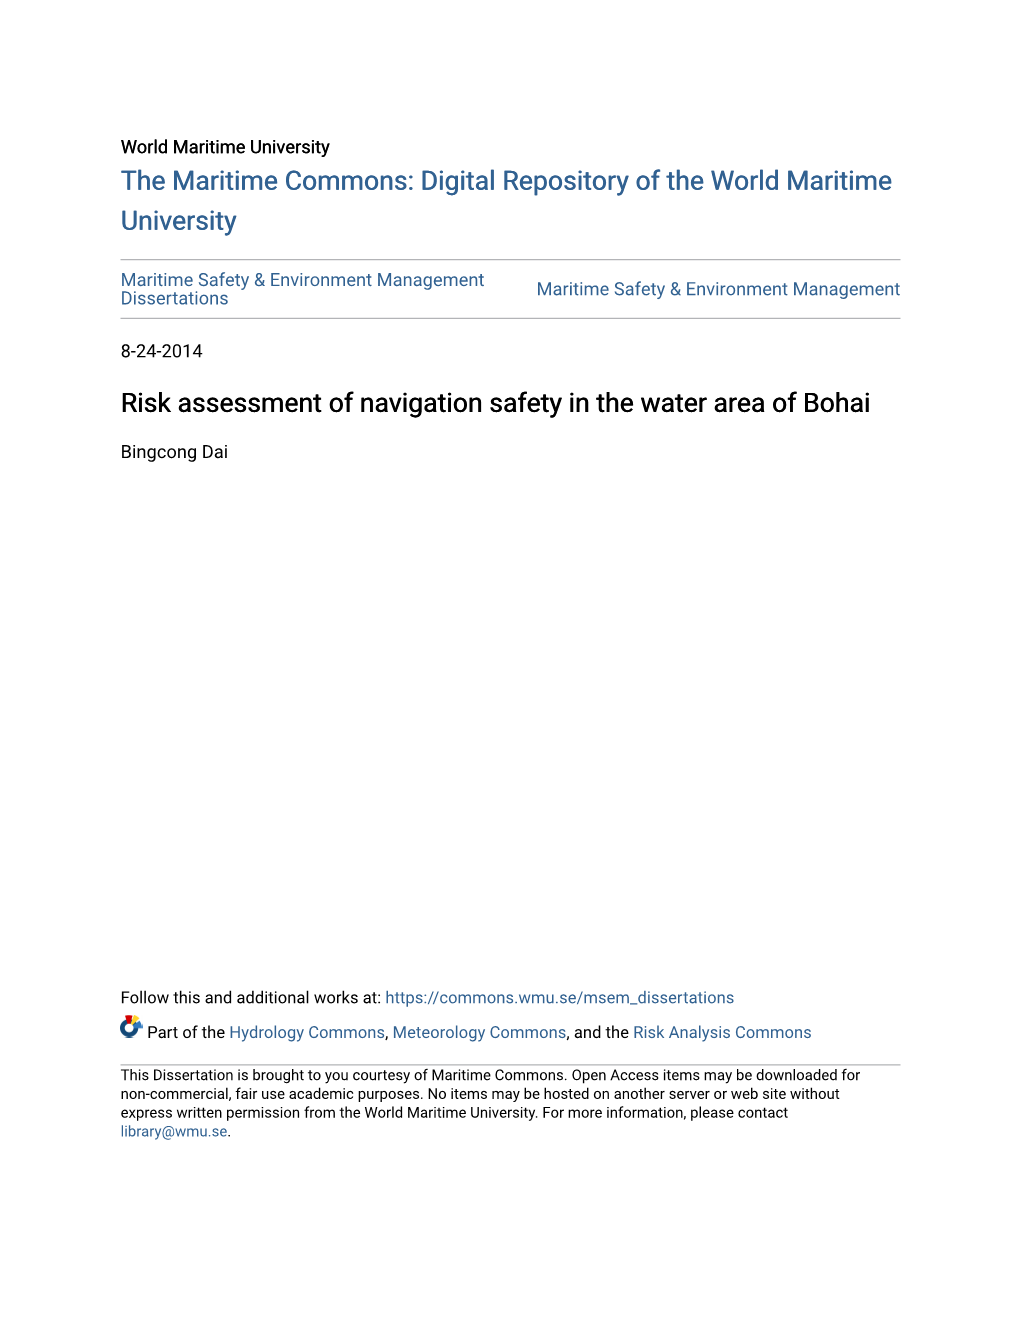 Risk Assessment of Navigation Safety in the Water Area of Bohai